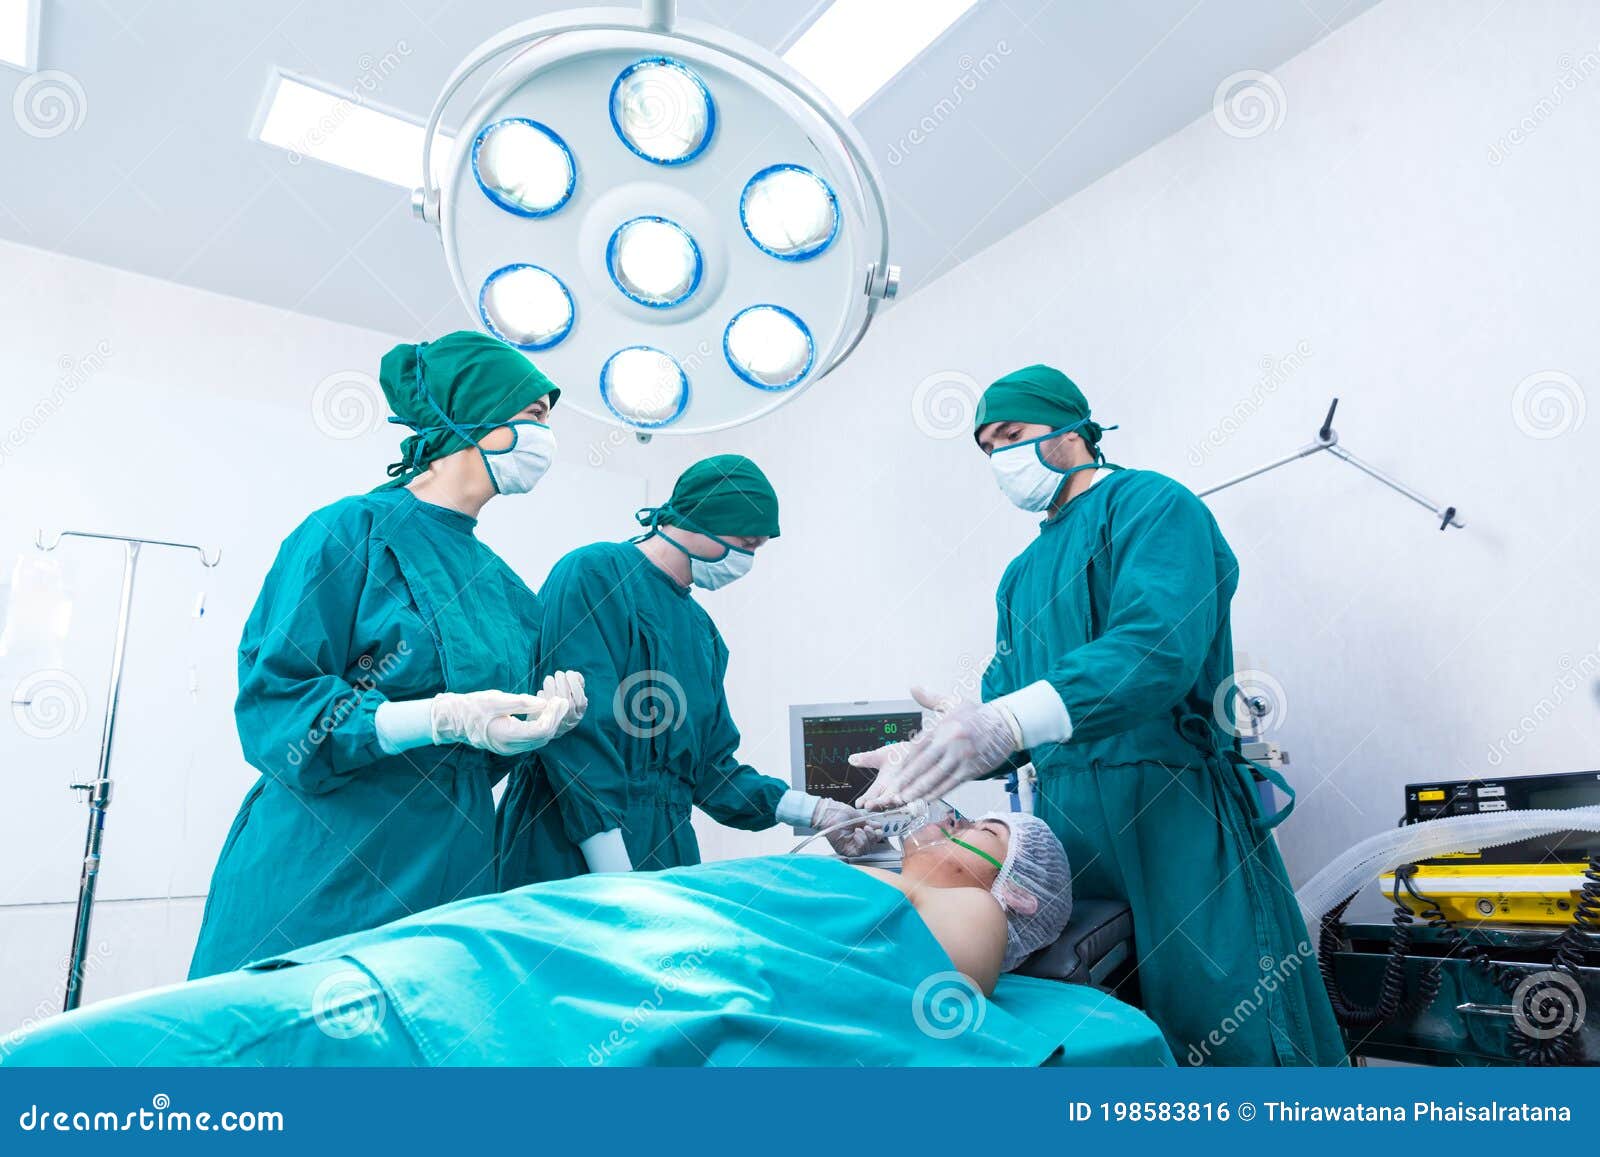 The Surgeon Is Doing Surgery On Emergency Patients In The Emergency